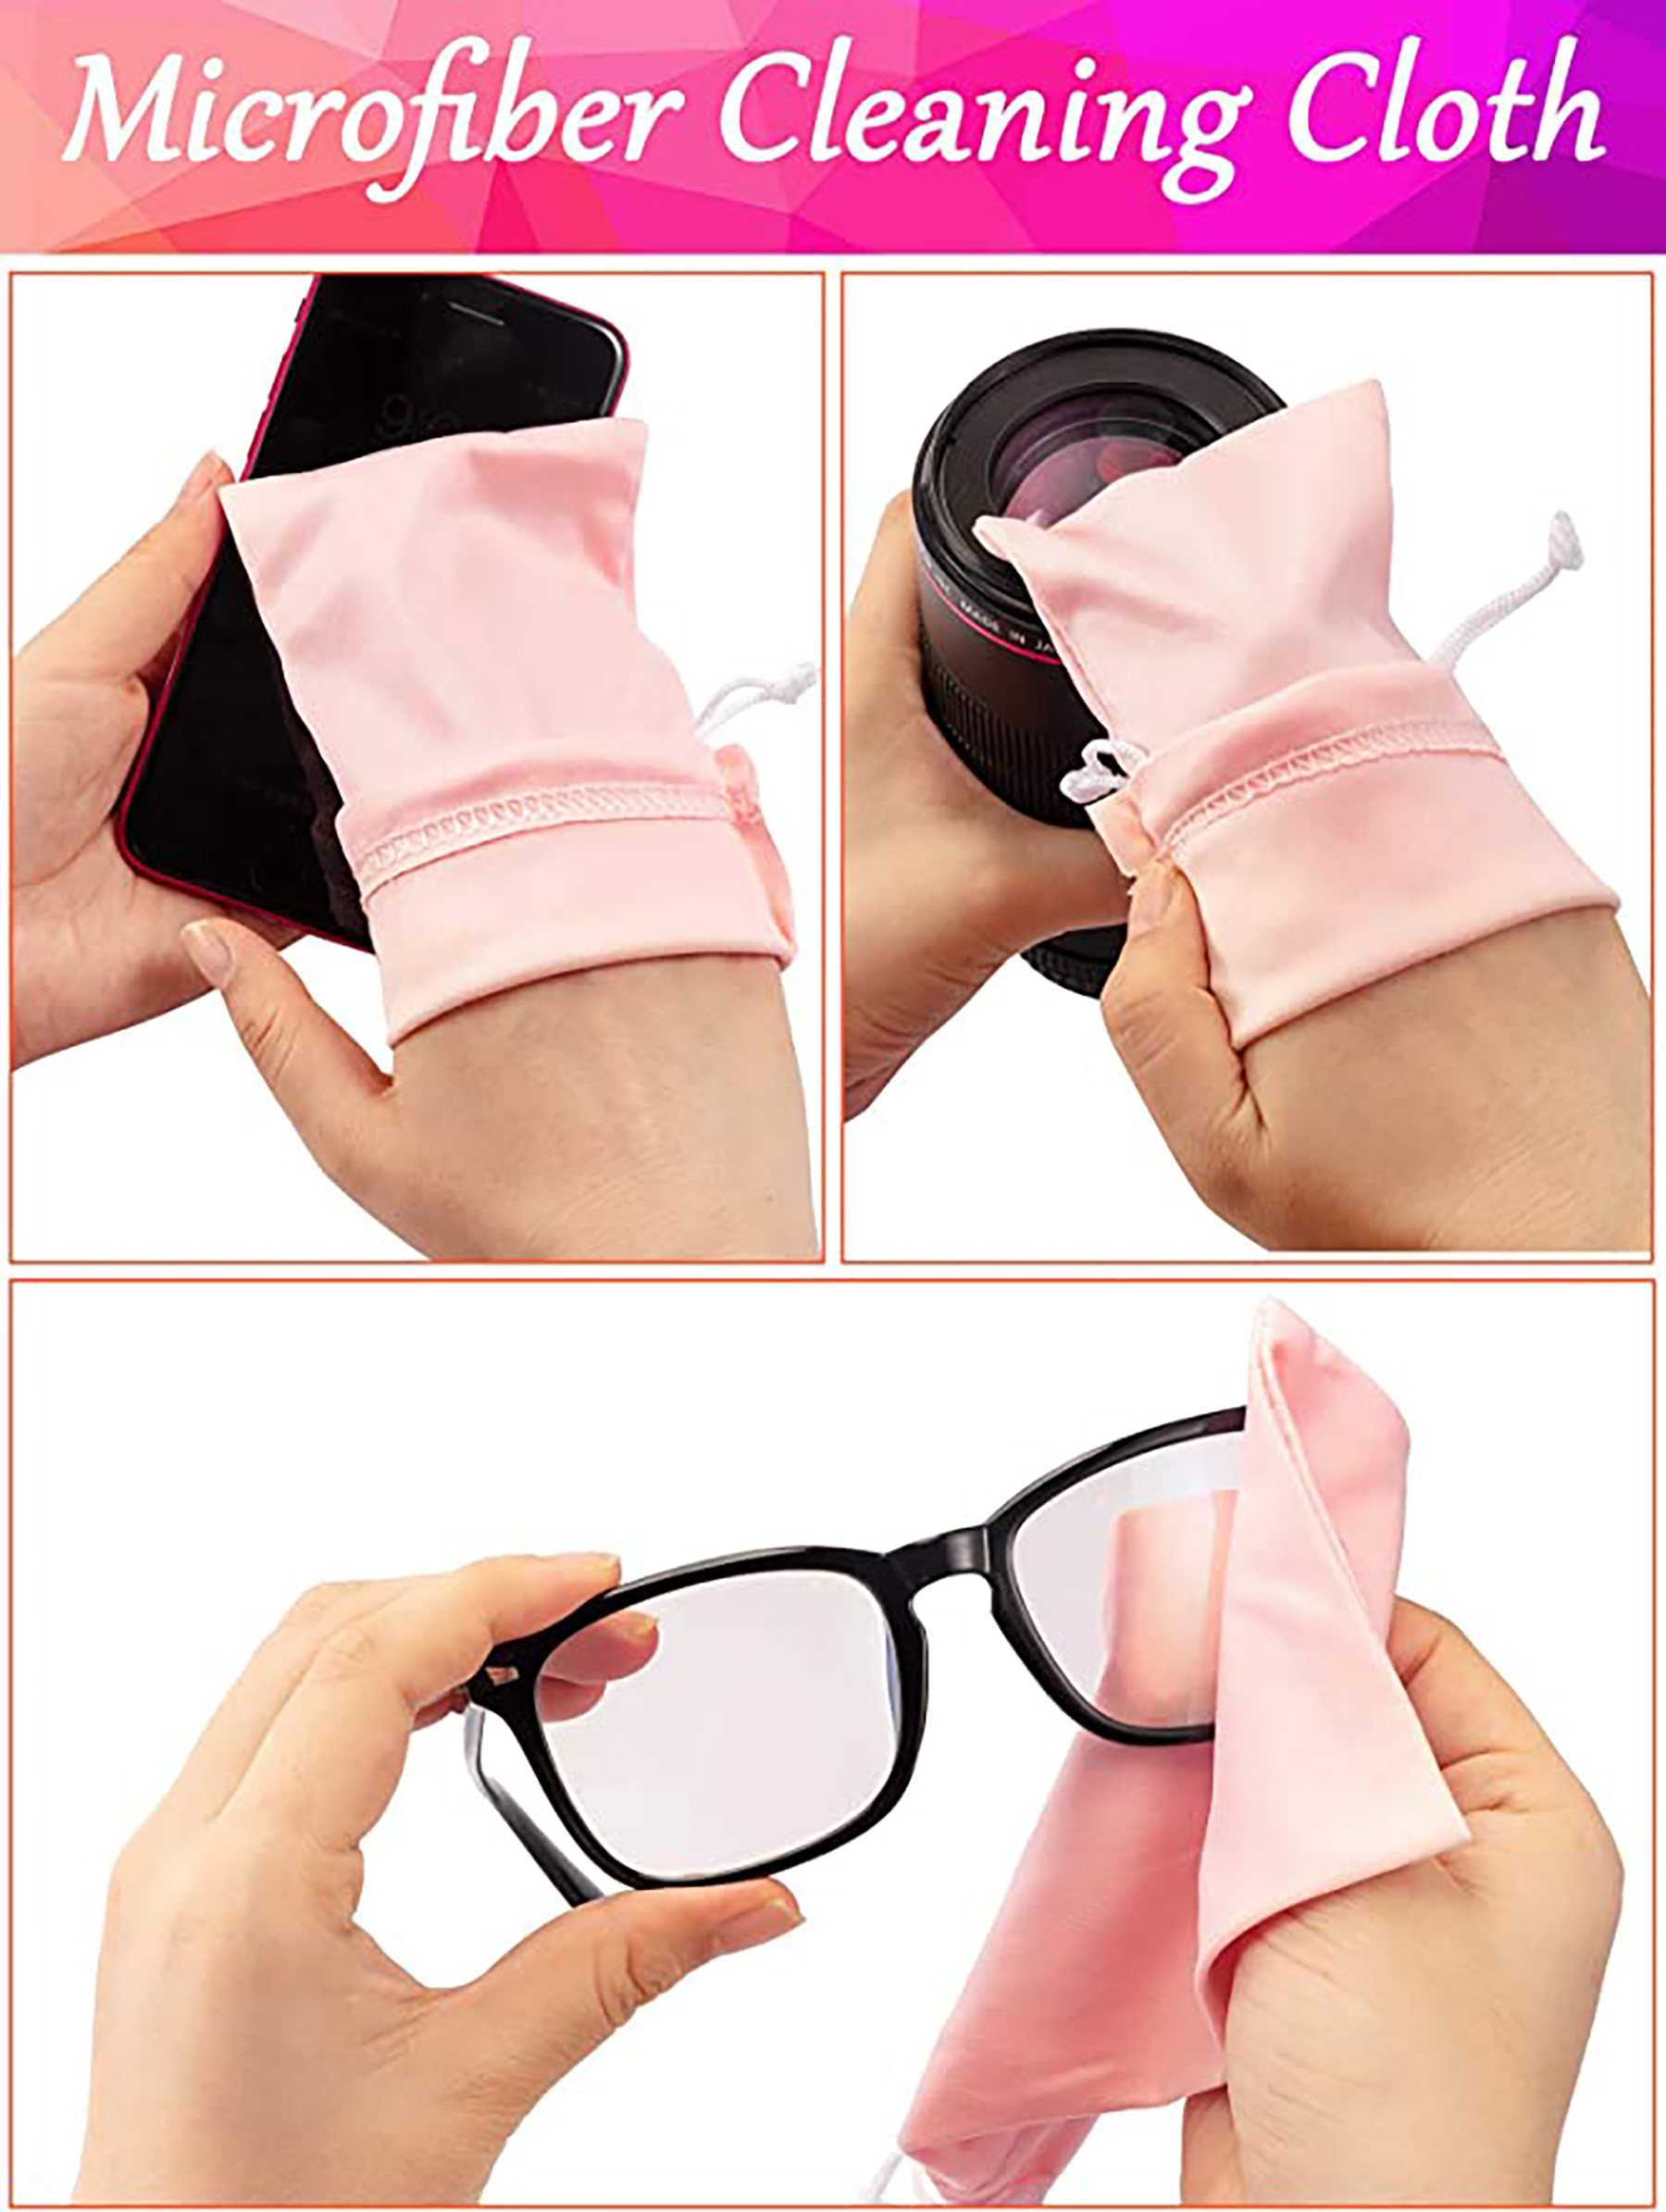 Microfiber Sunglasses Pouch With Drawstring Closure